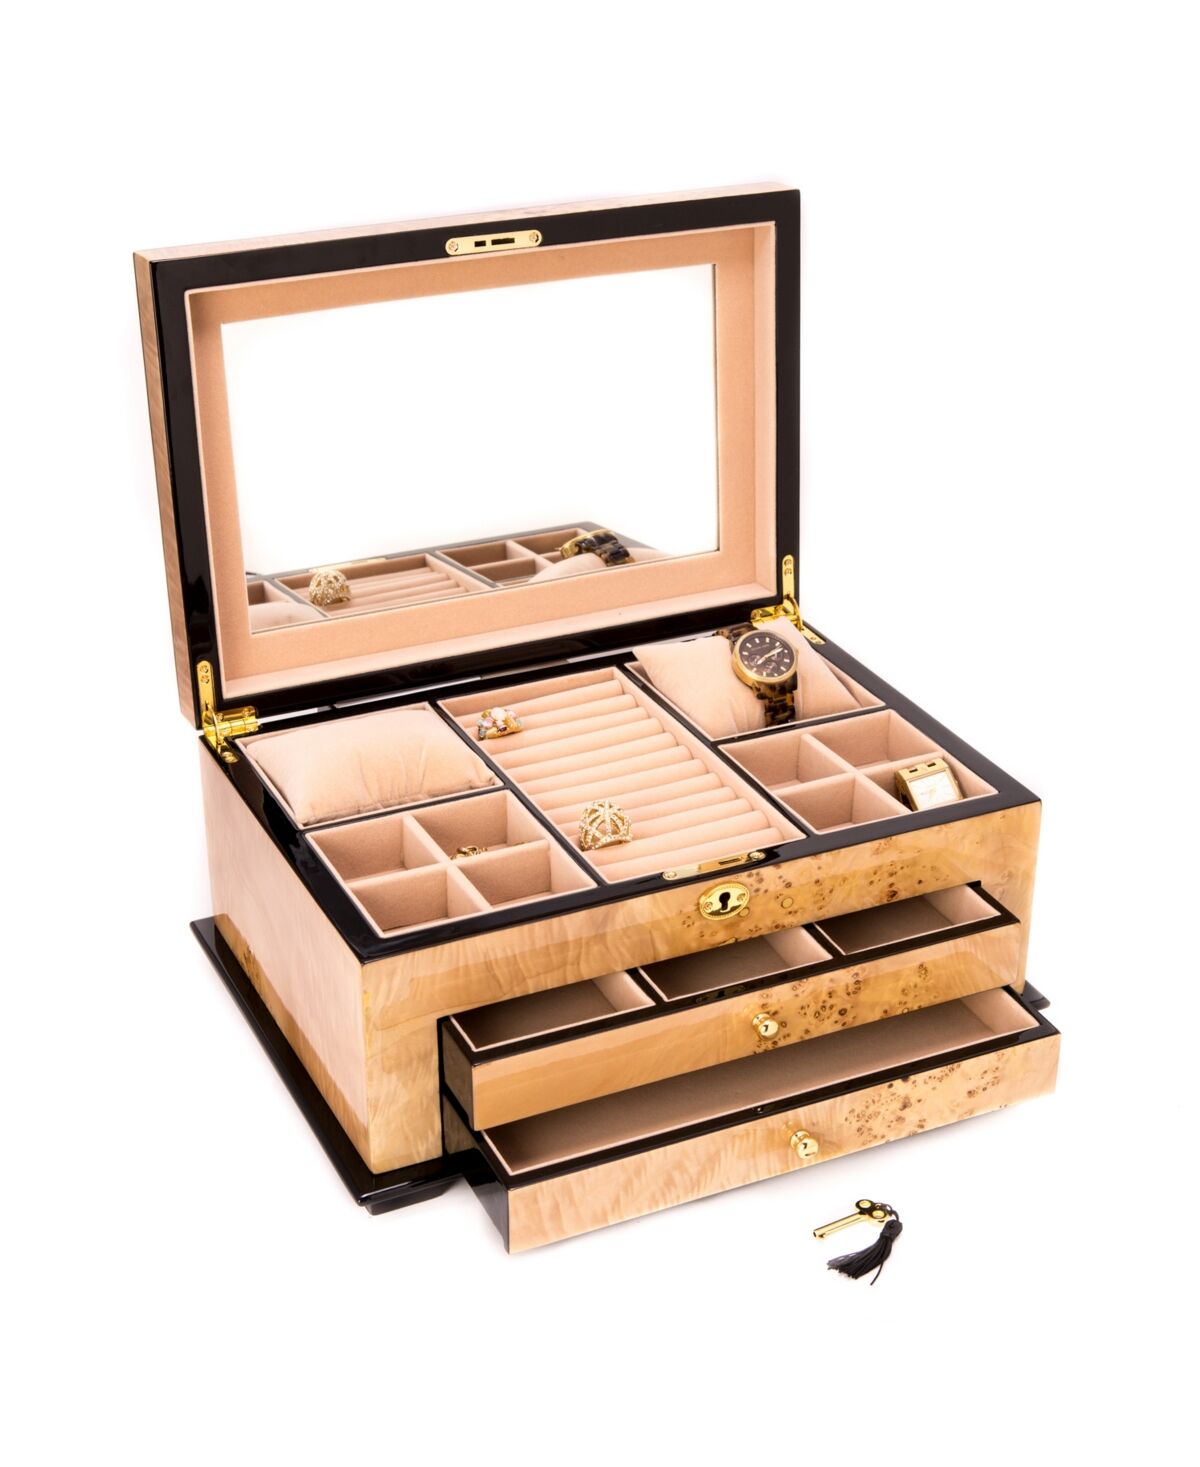 Bey-Berk Birdseye Maple 3 Level Jewelry Box with Gold tone Accents and Locking Lid - Multi